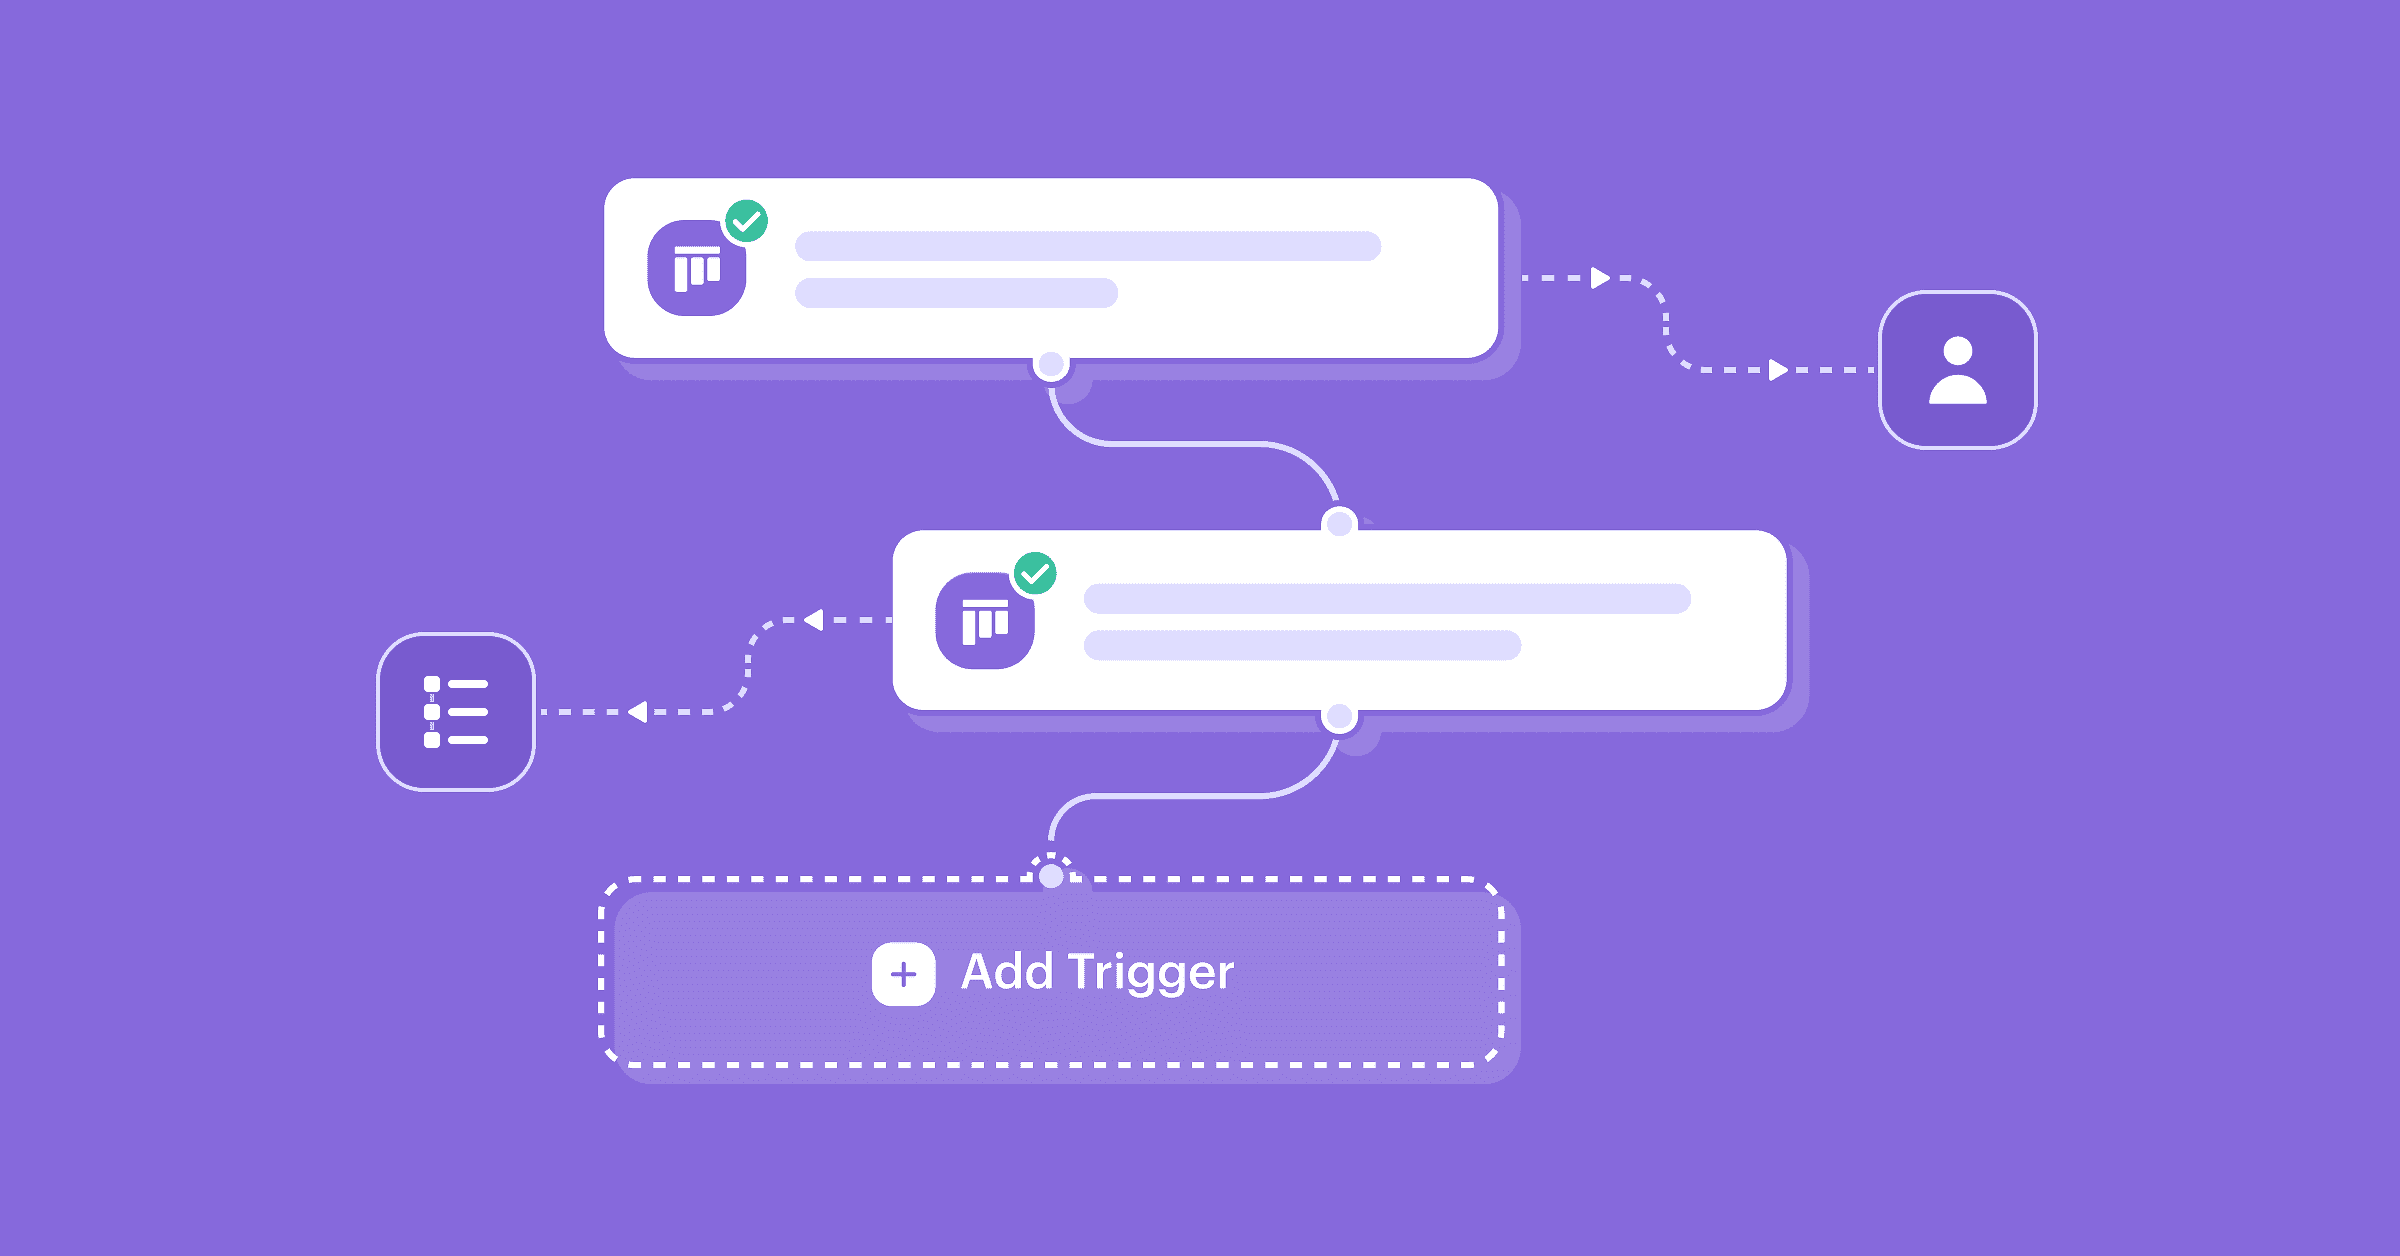 Announcing our new Workflow Automation features